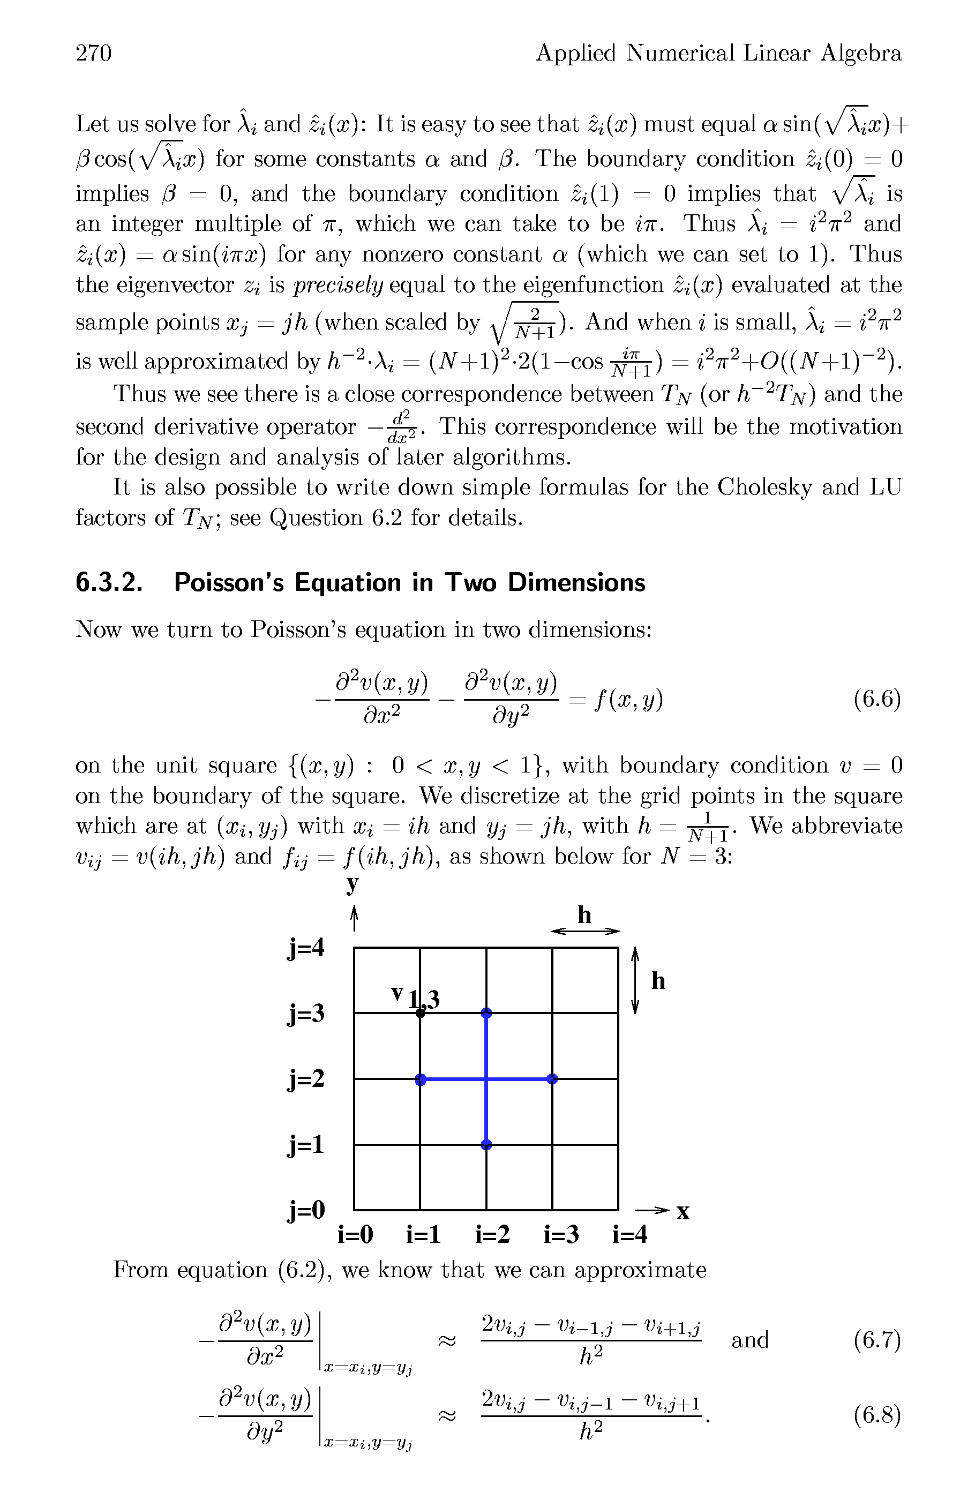 6.3.2 Poisson's Equation in Two Dimensions